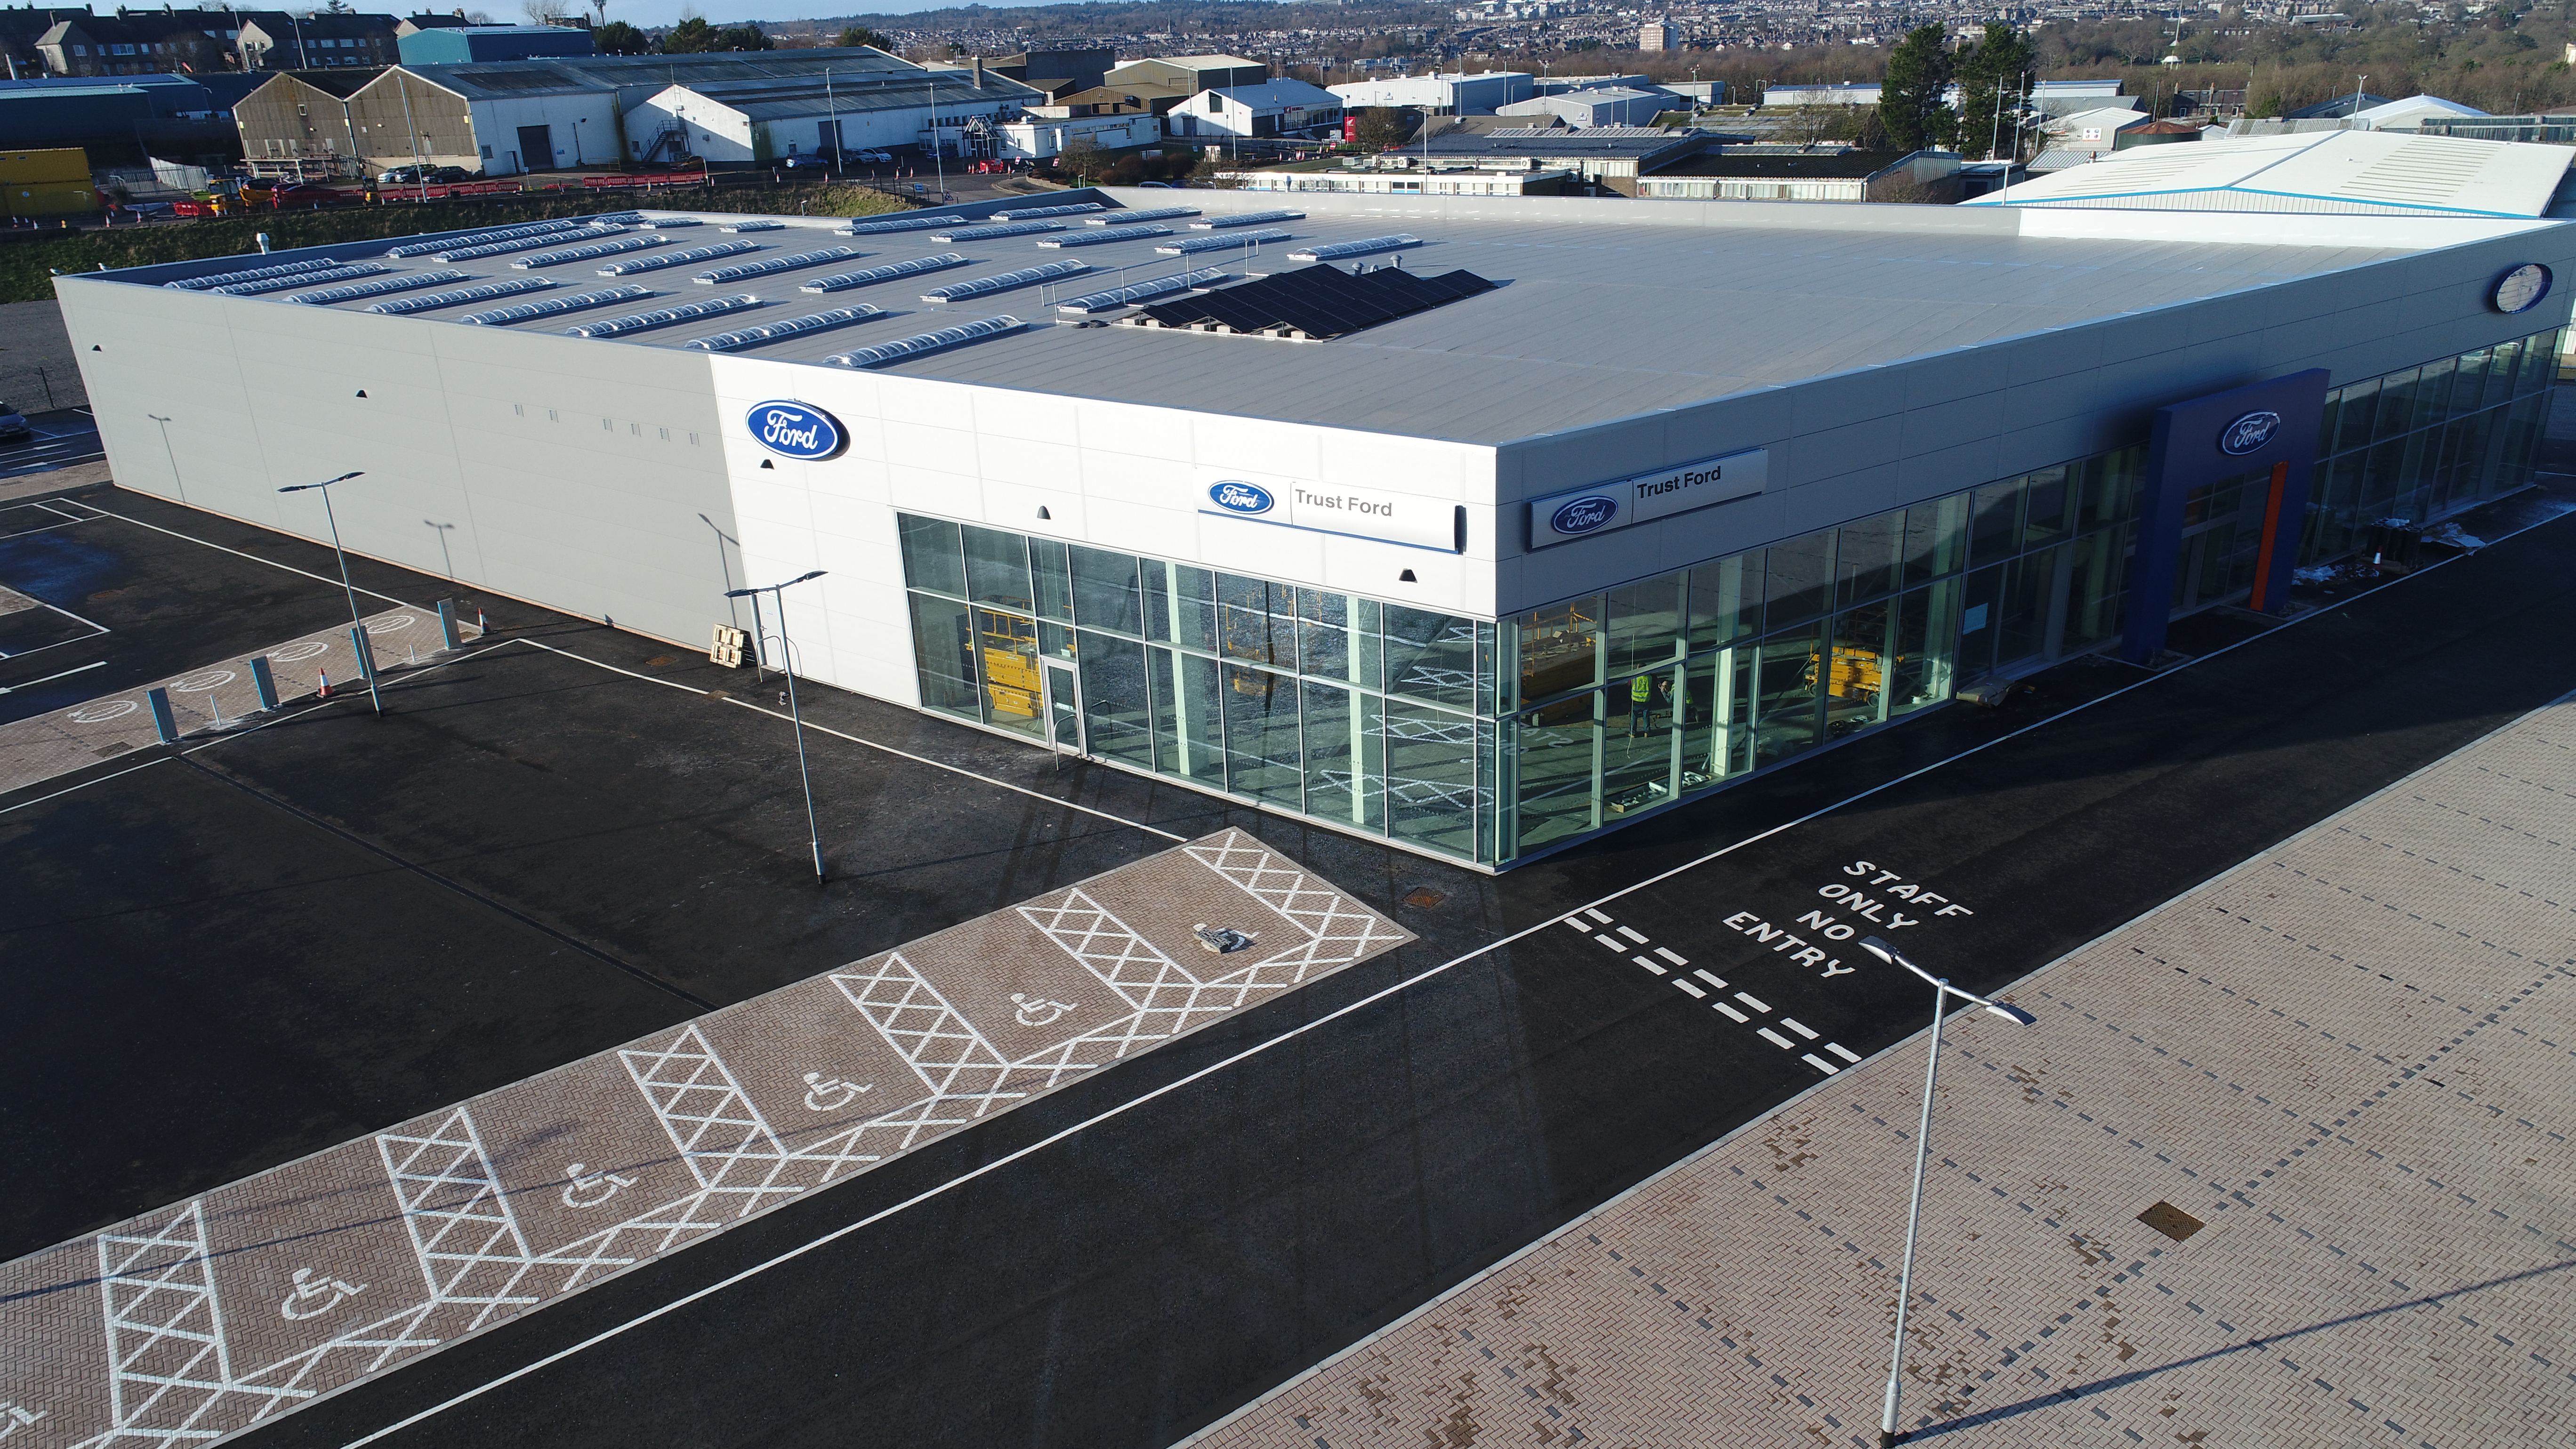 Knight Property Group completes TrustFord's £10m Aberdeen showroom and service facility